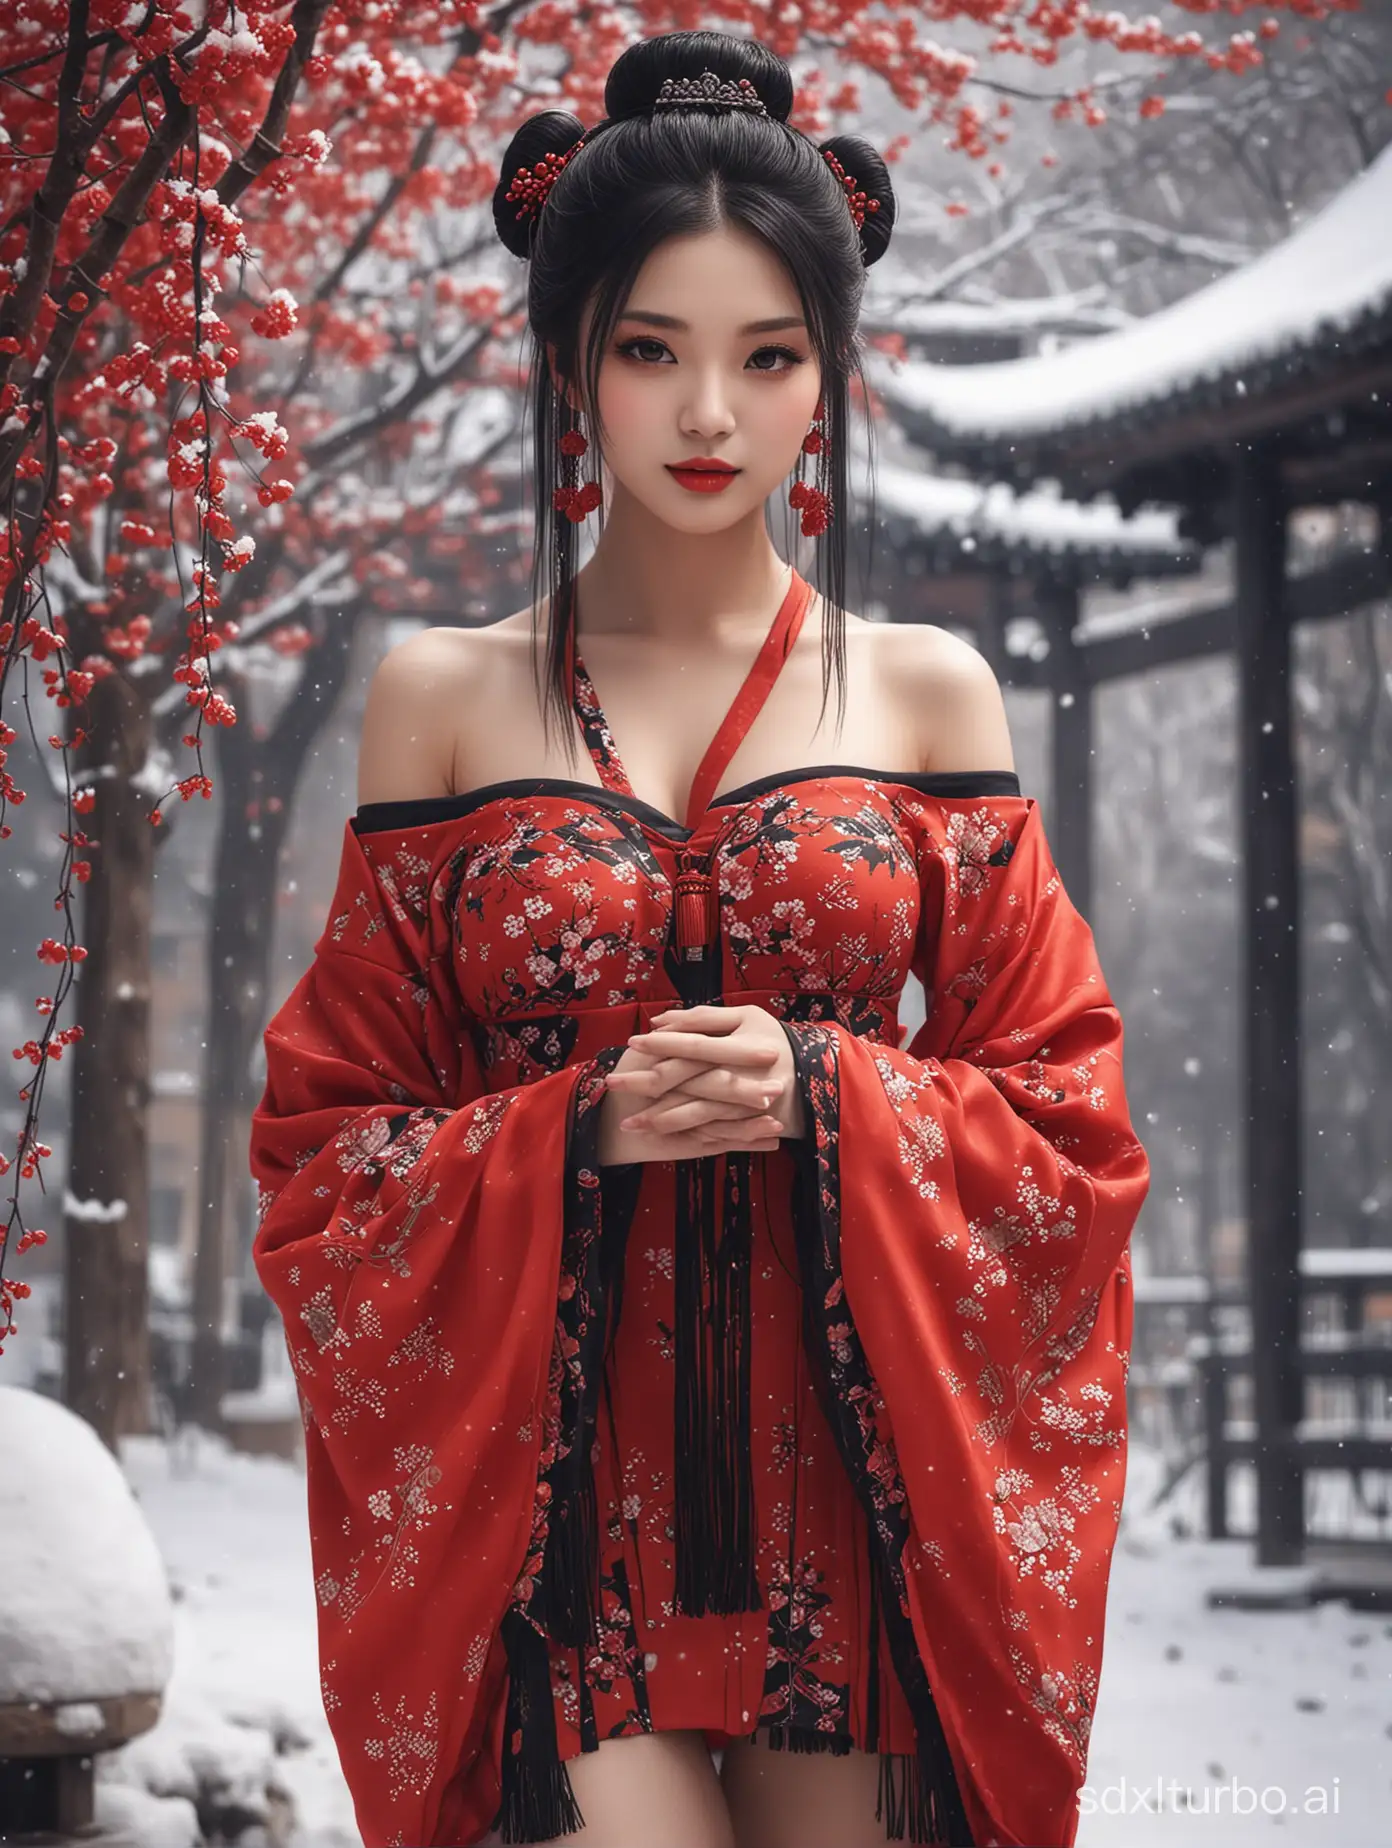 Enchanting-Solo-Portrait-Elegant-Lady-in-Red-Chinese-Attire-with-Floral-Accents